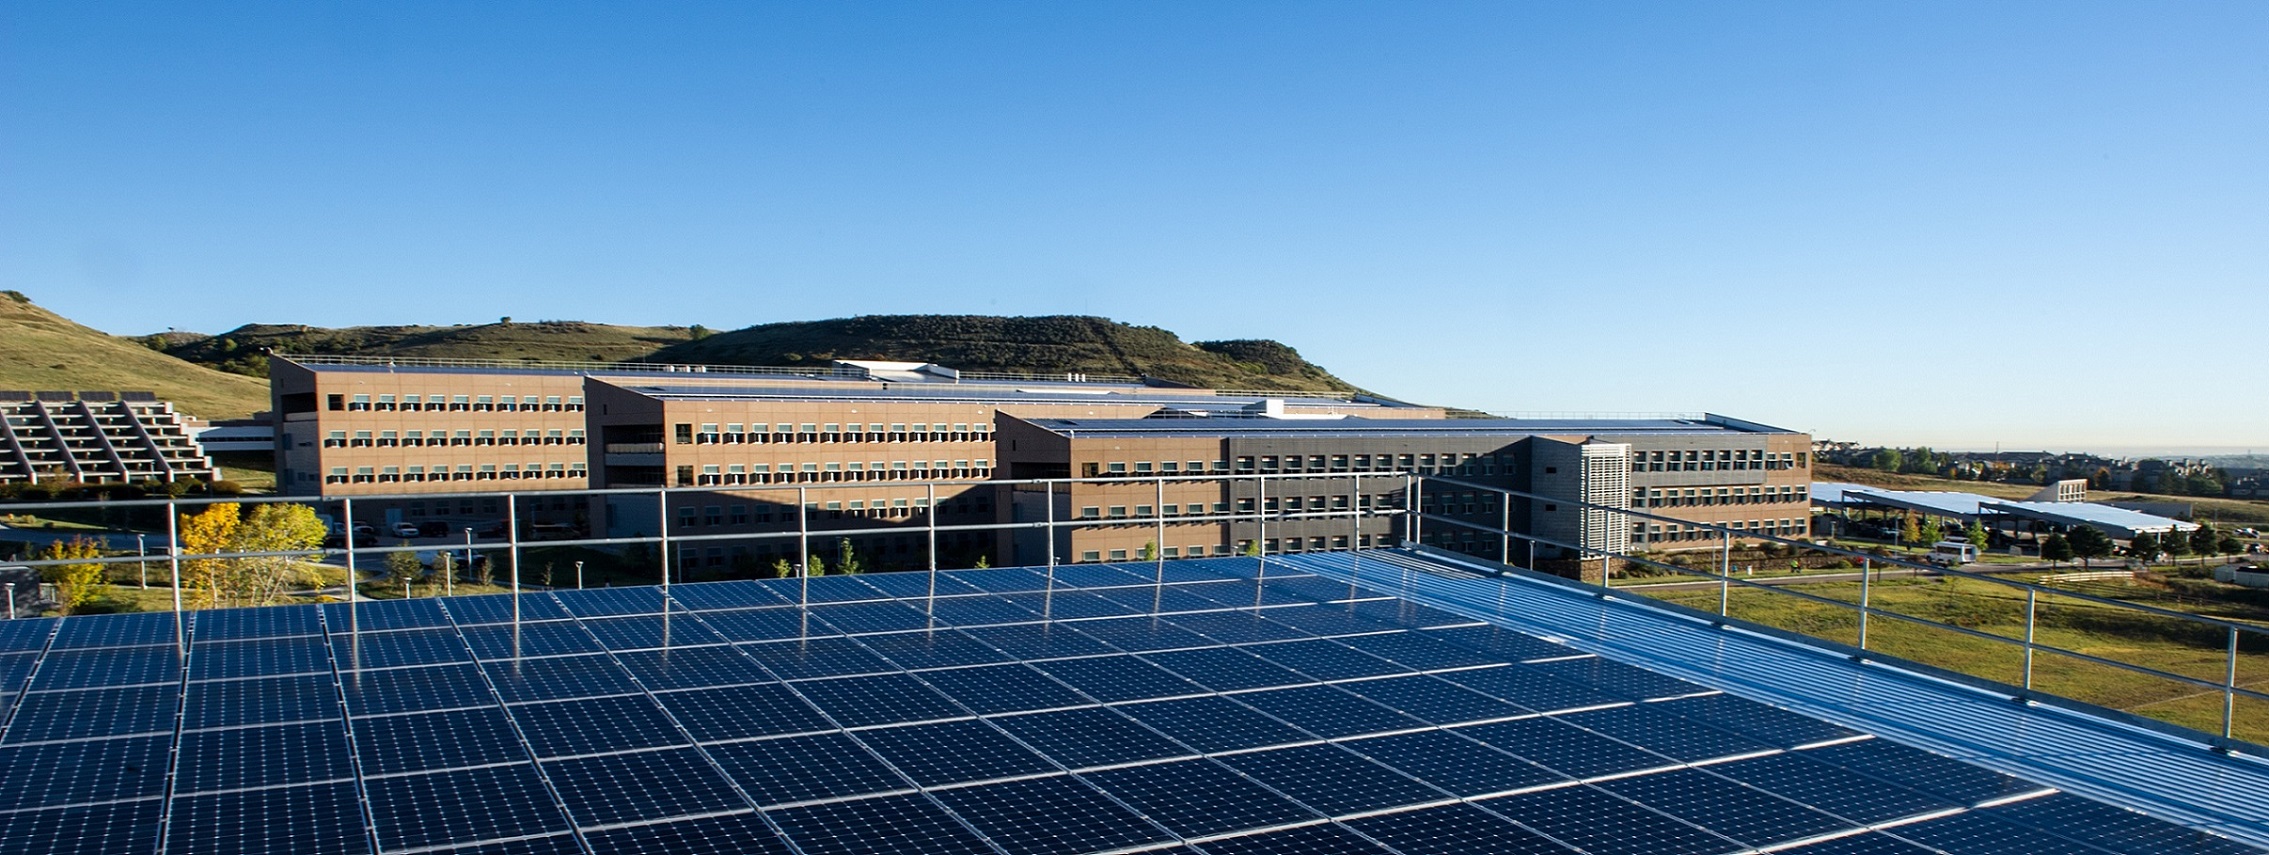 October 7, 2013 - NREL's sustainable STM campus showing the SunPower PV array atop of the Parking Garage, overlooking the SERF, Cafe and RSF.  (Photo by Dennis Schroeder / NREL)